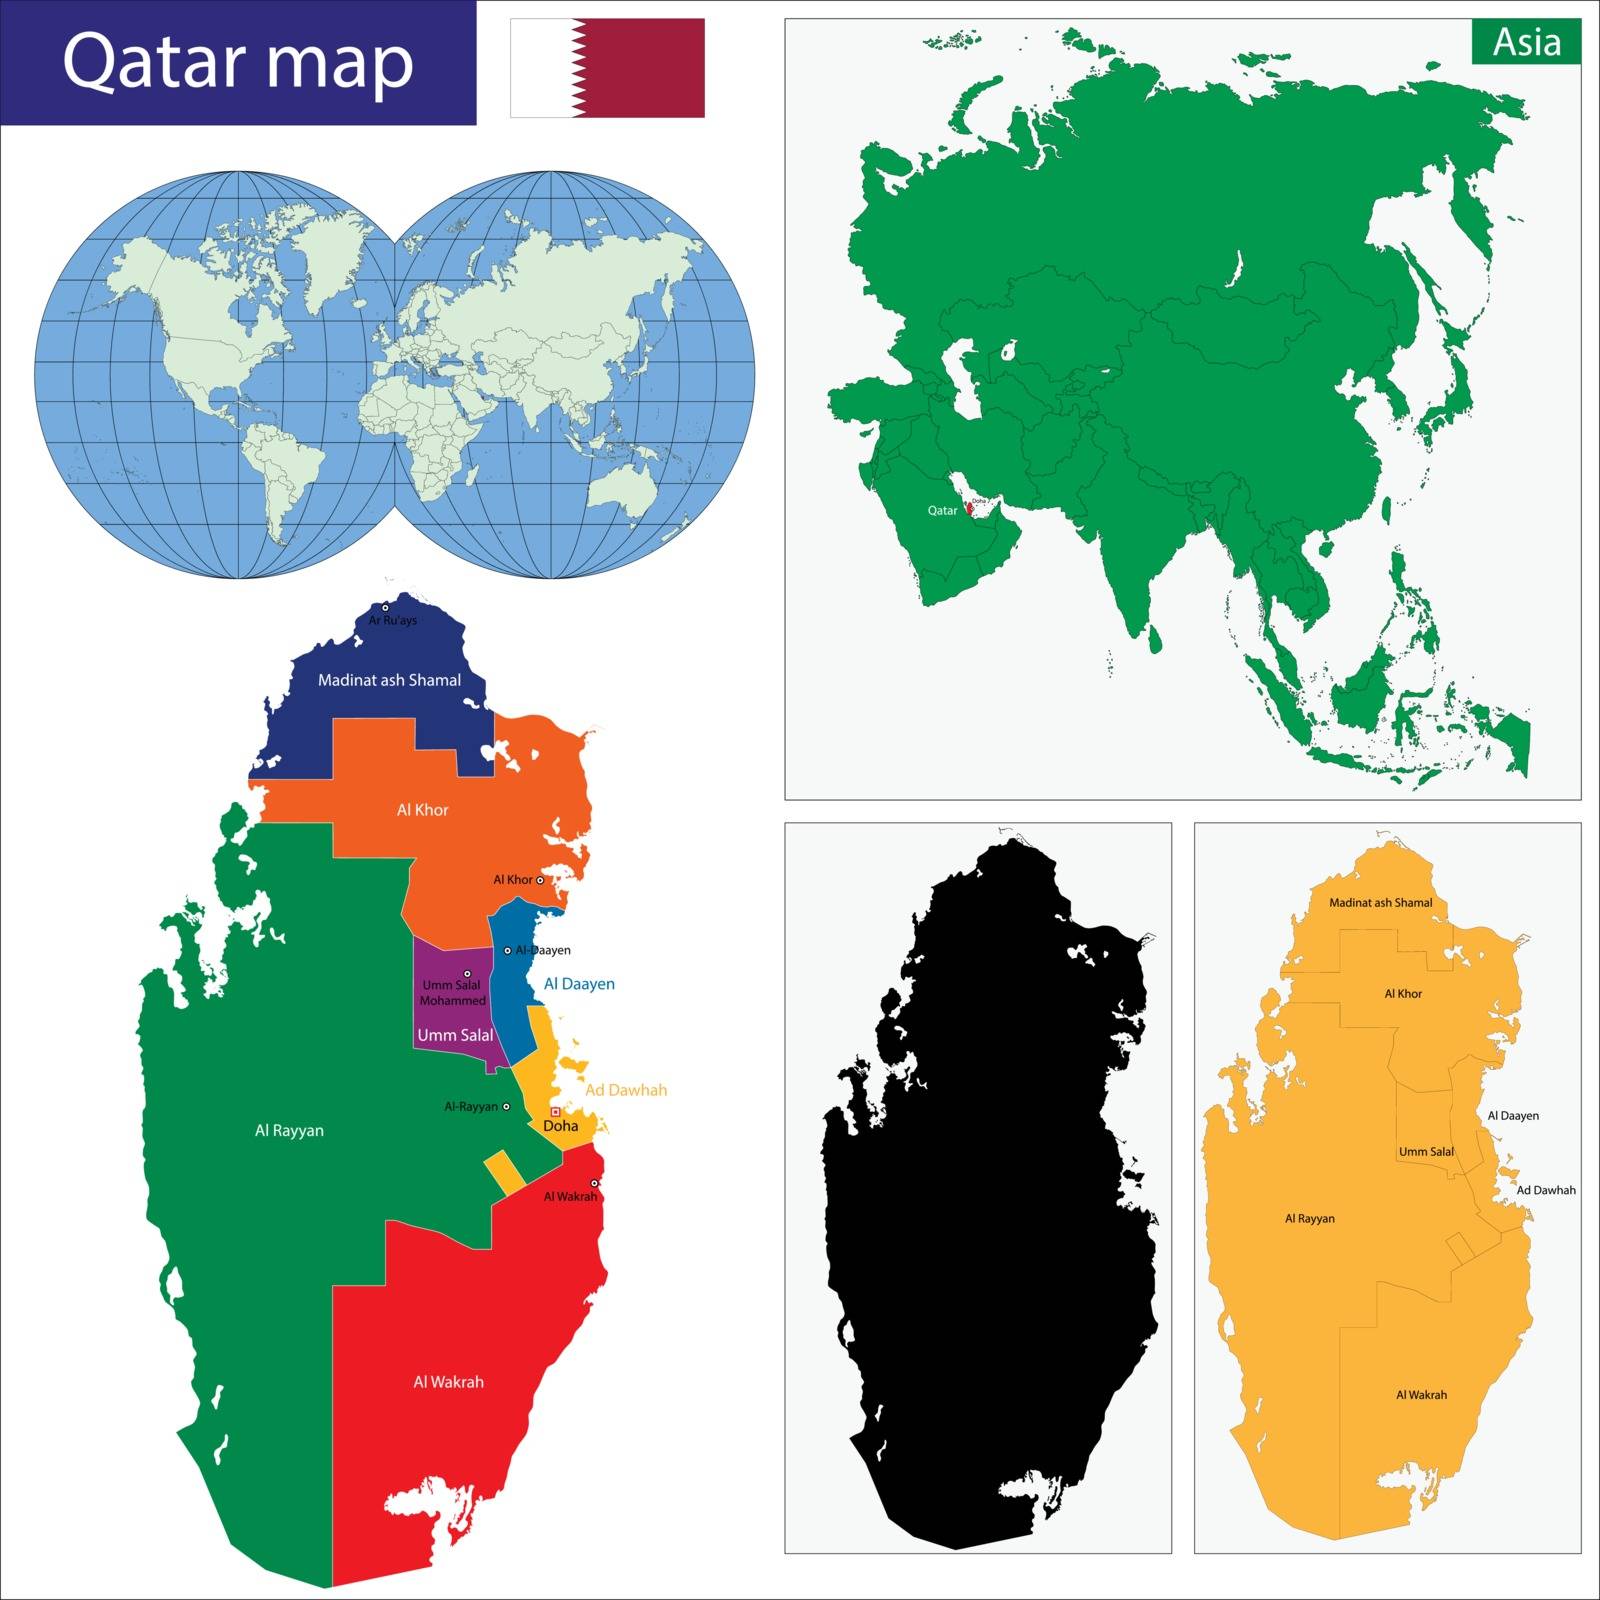 Map of the State of Qatar drawn with high detail and accuracy